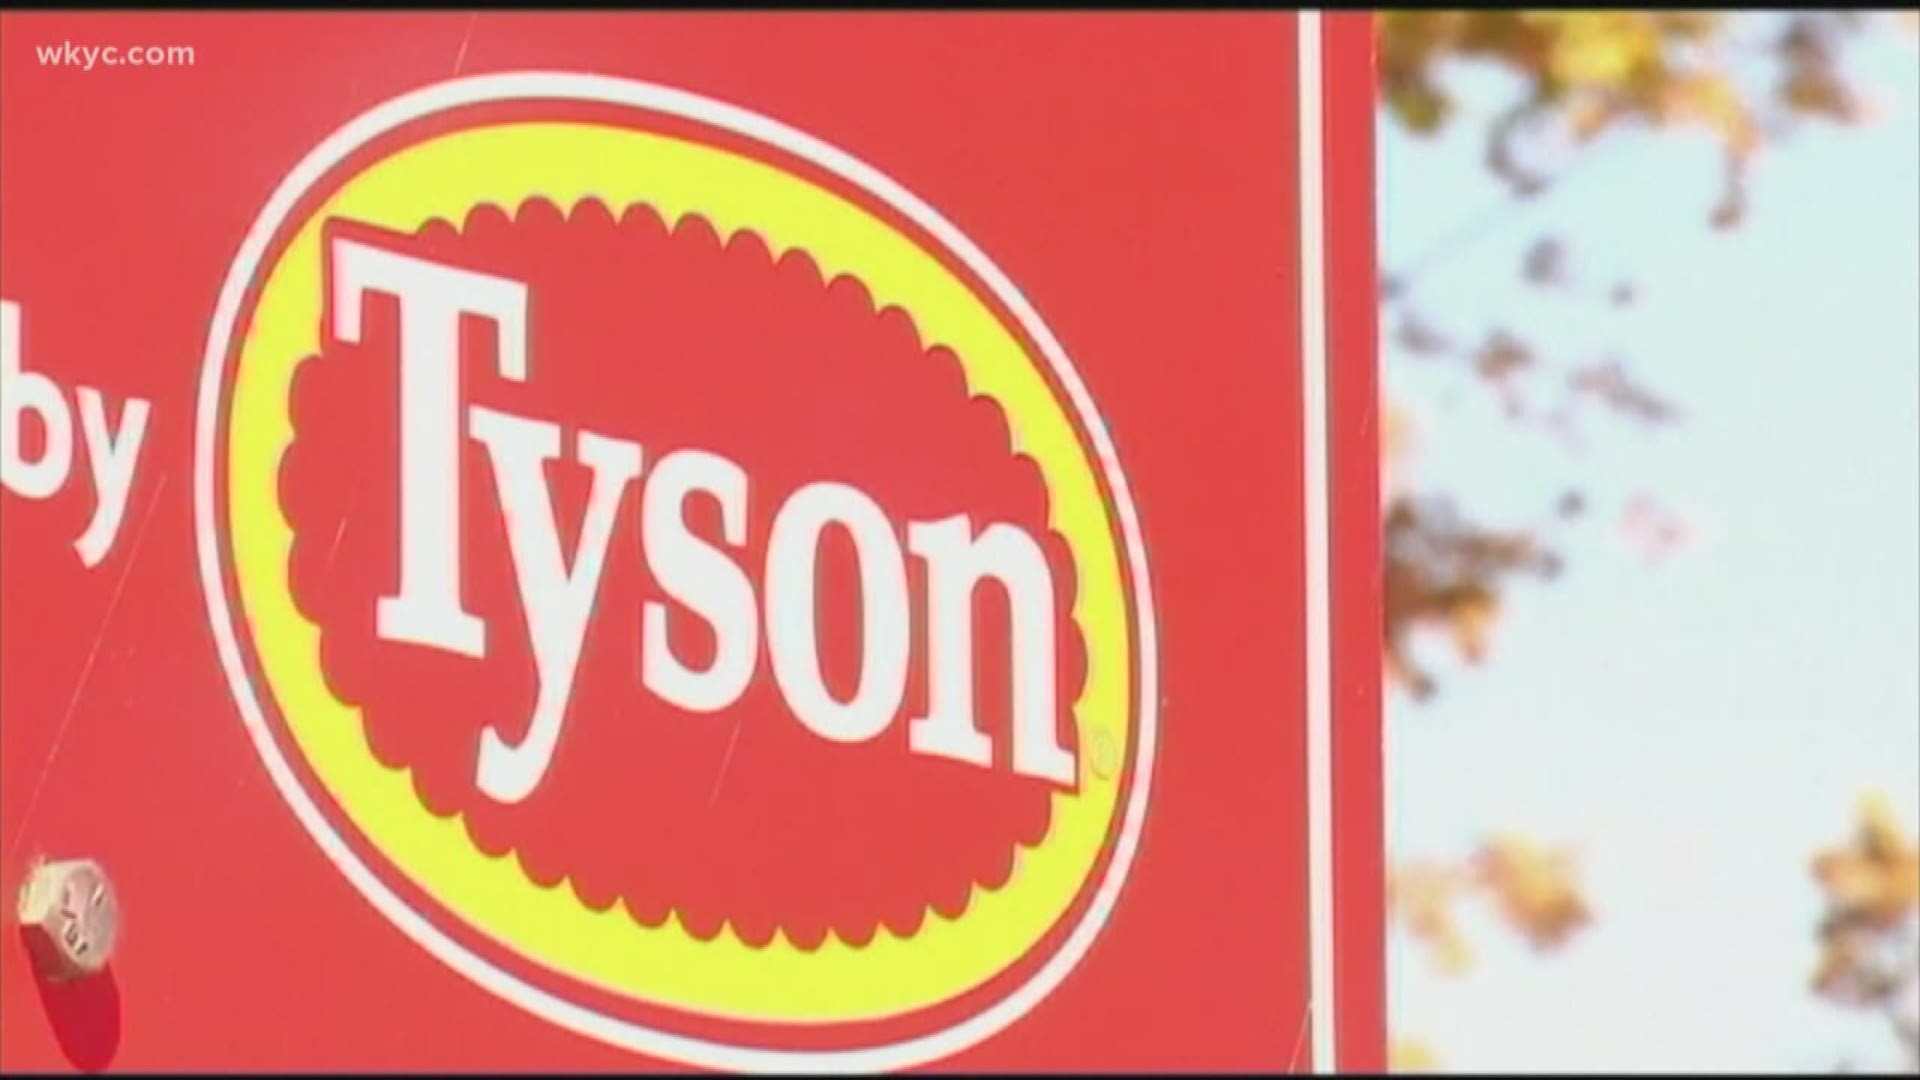 Frontline workers and truckers employed by Tyson Foods are being given some extra financial help from the company amid concerns during the coronavirus pandemic.